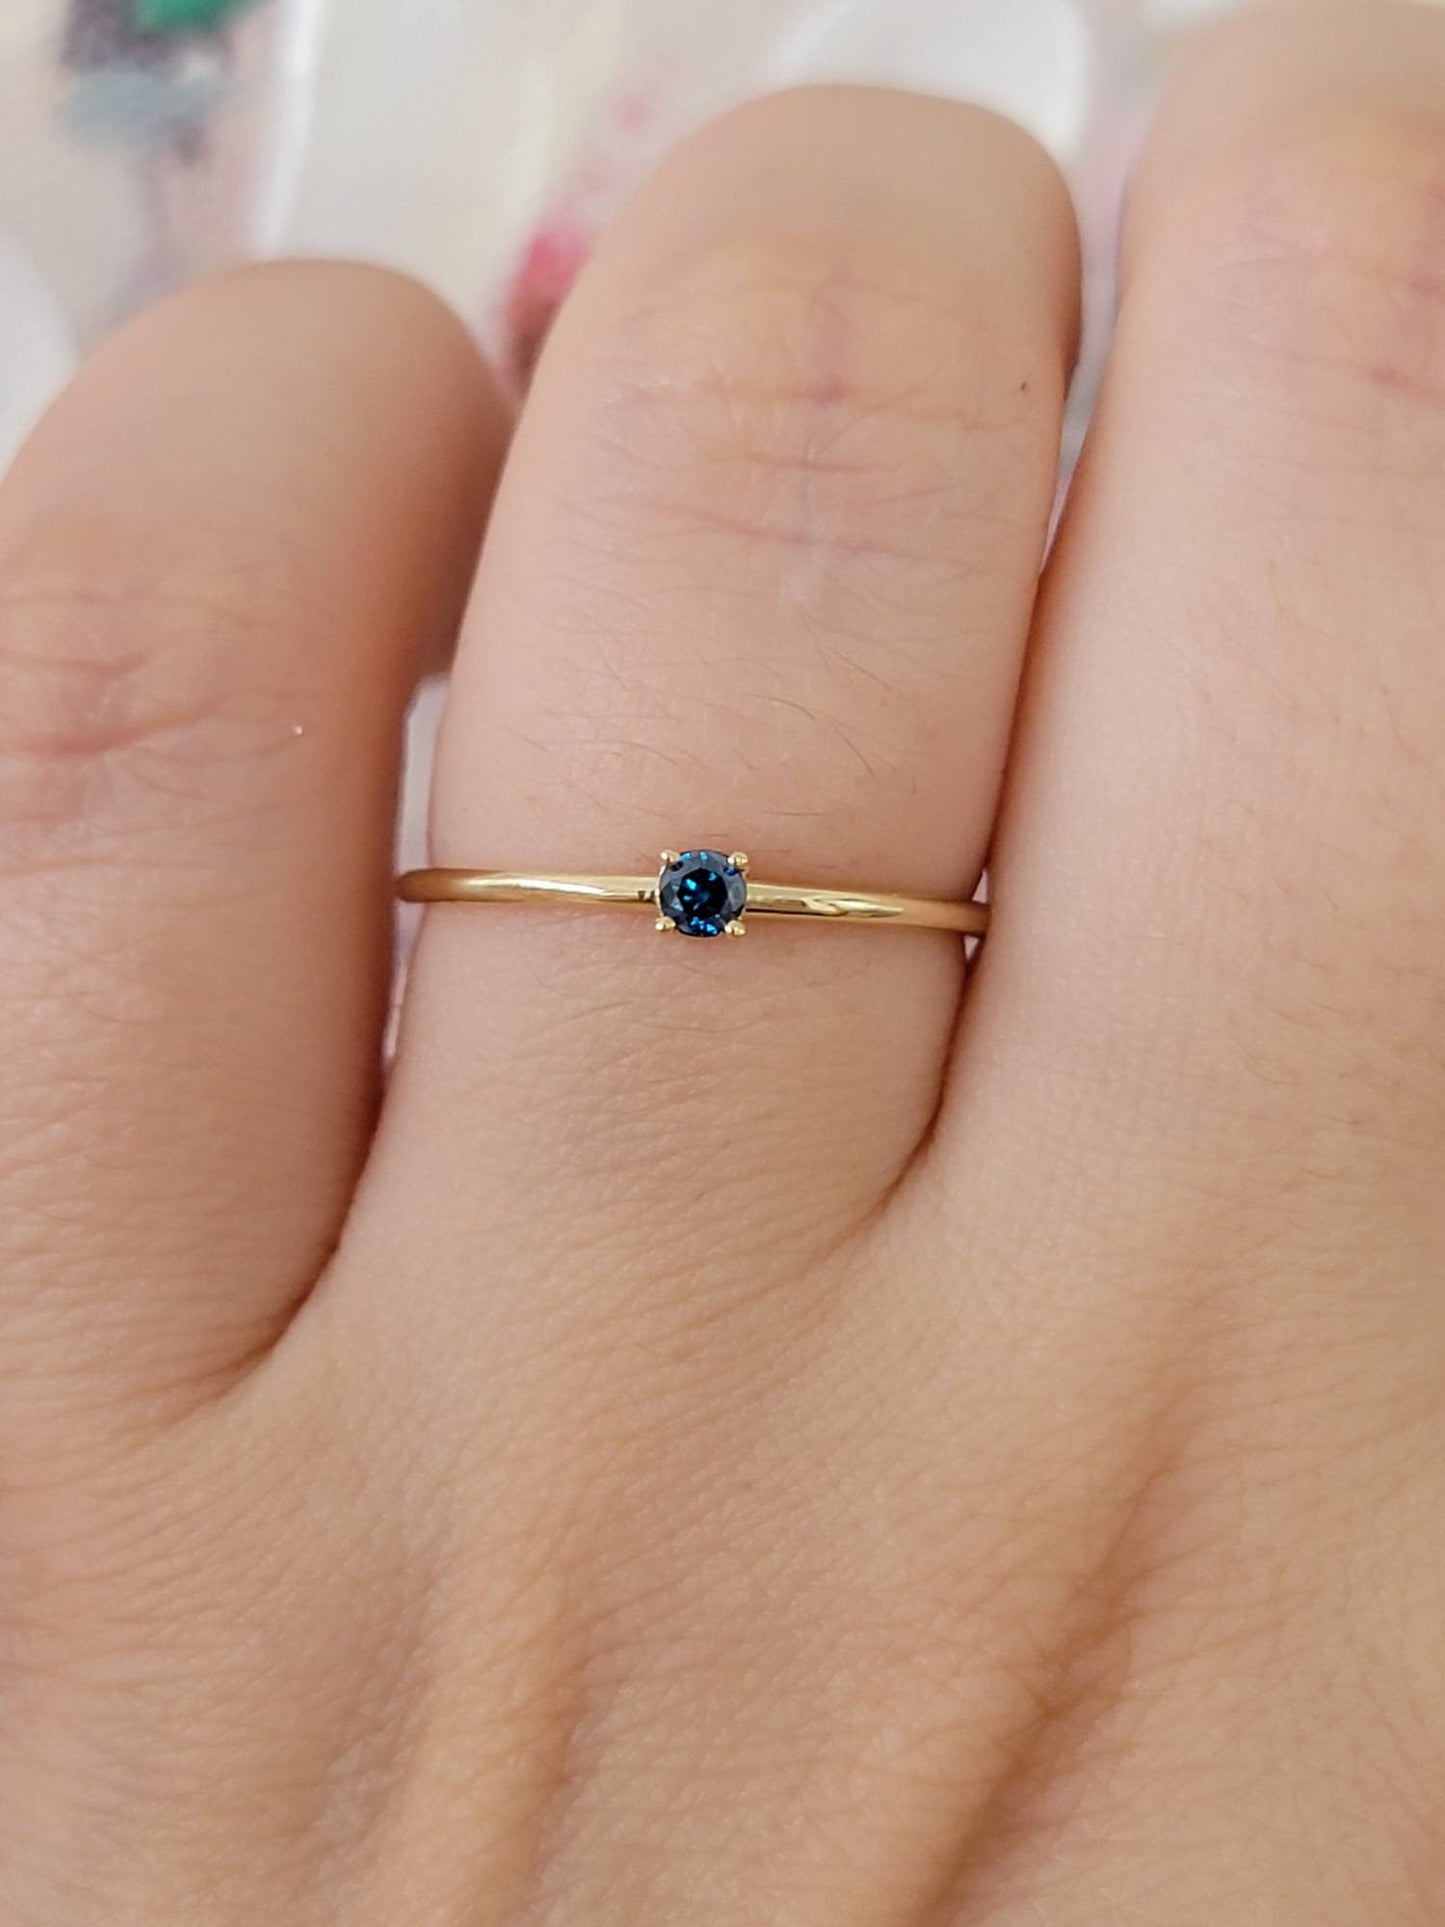 Natural Blue Diamond Ring In 14k Gold, 4 Prong Ring Blue Diamond Ring, Blue Diamond Wedding Ring, Blue Diamond Engagement Band, Gift for Her